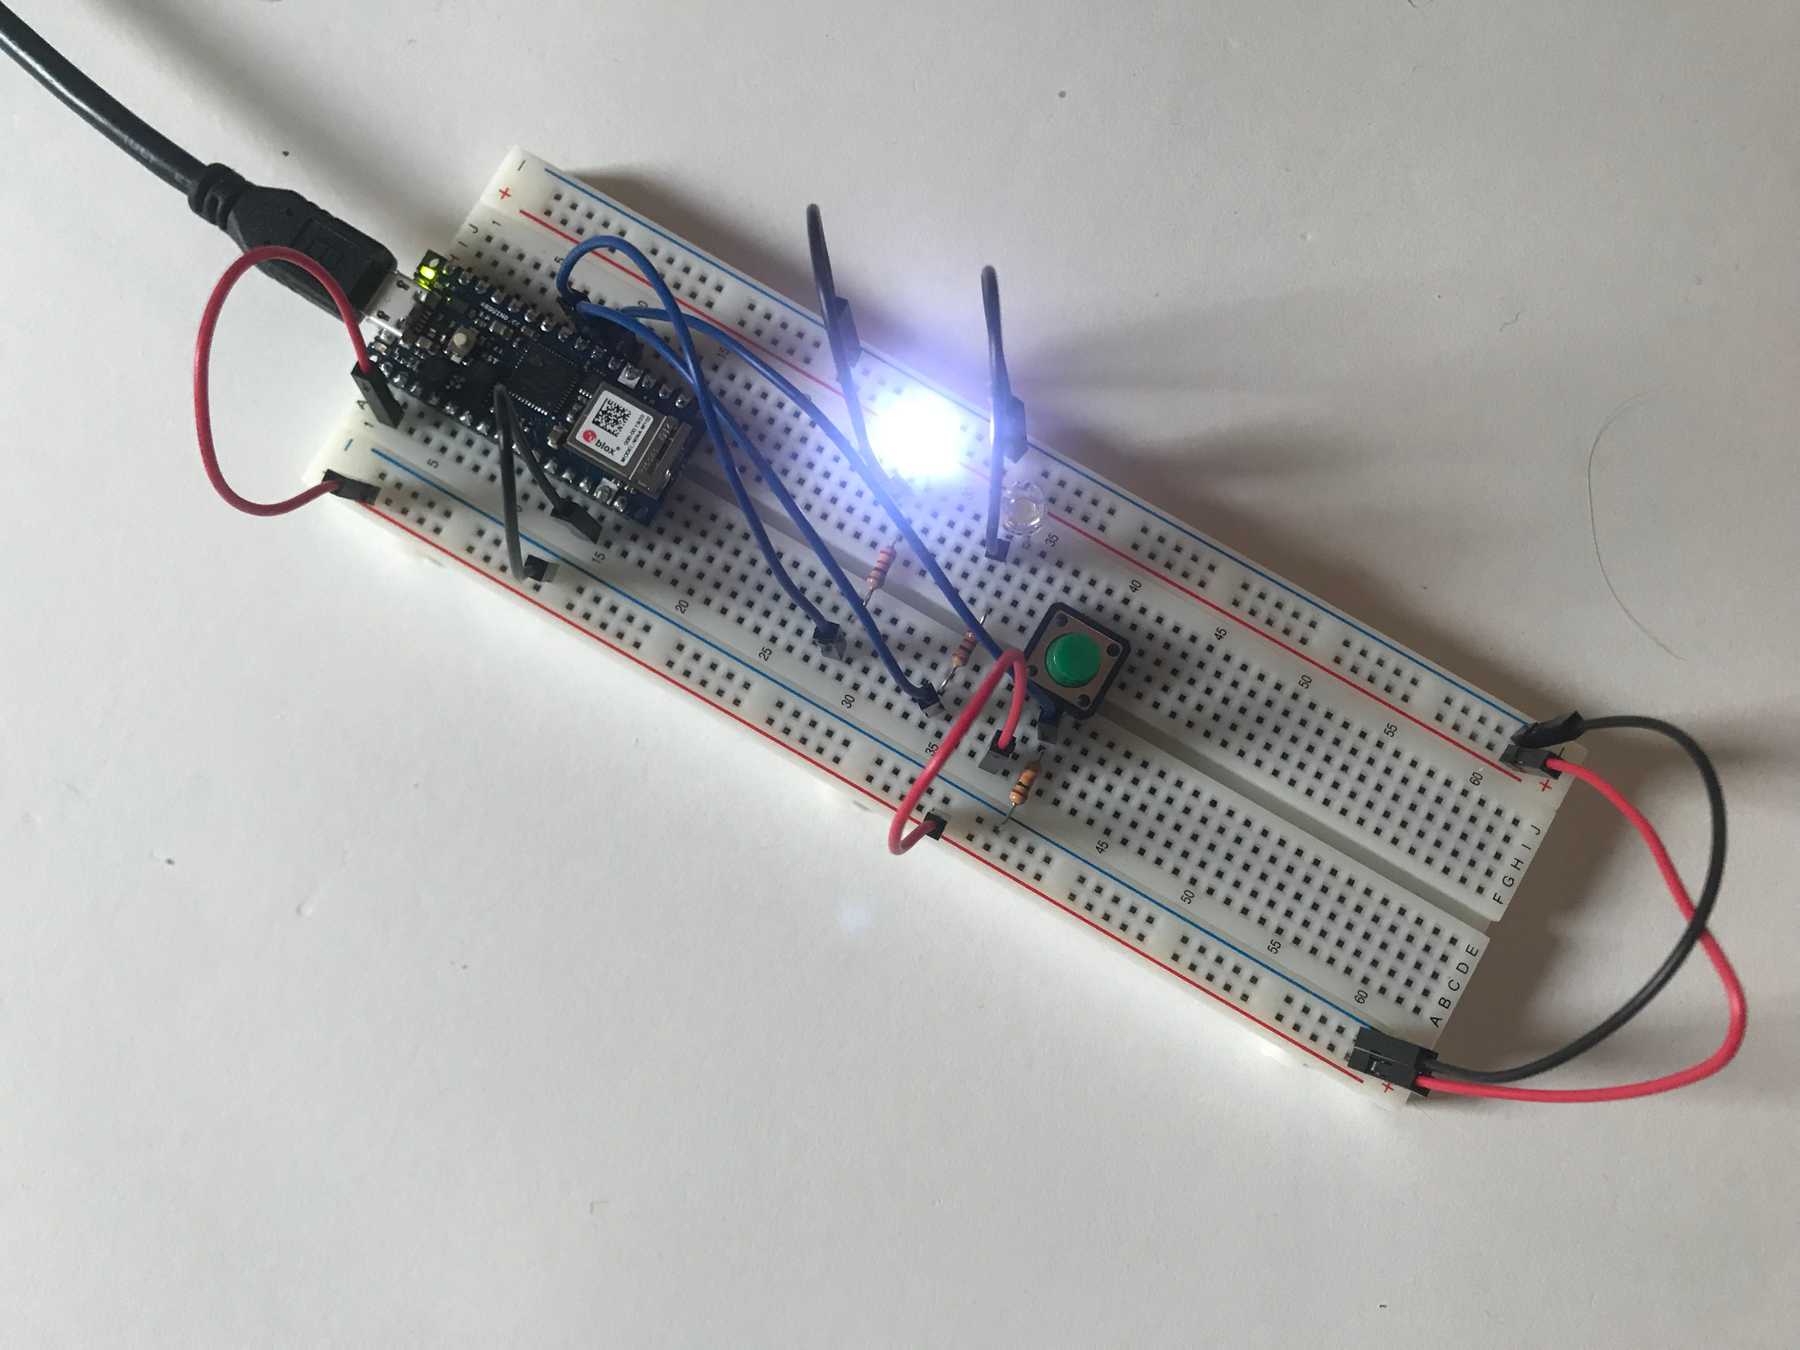 The first LED lights up after uploading the code